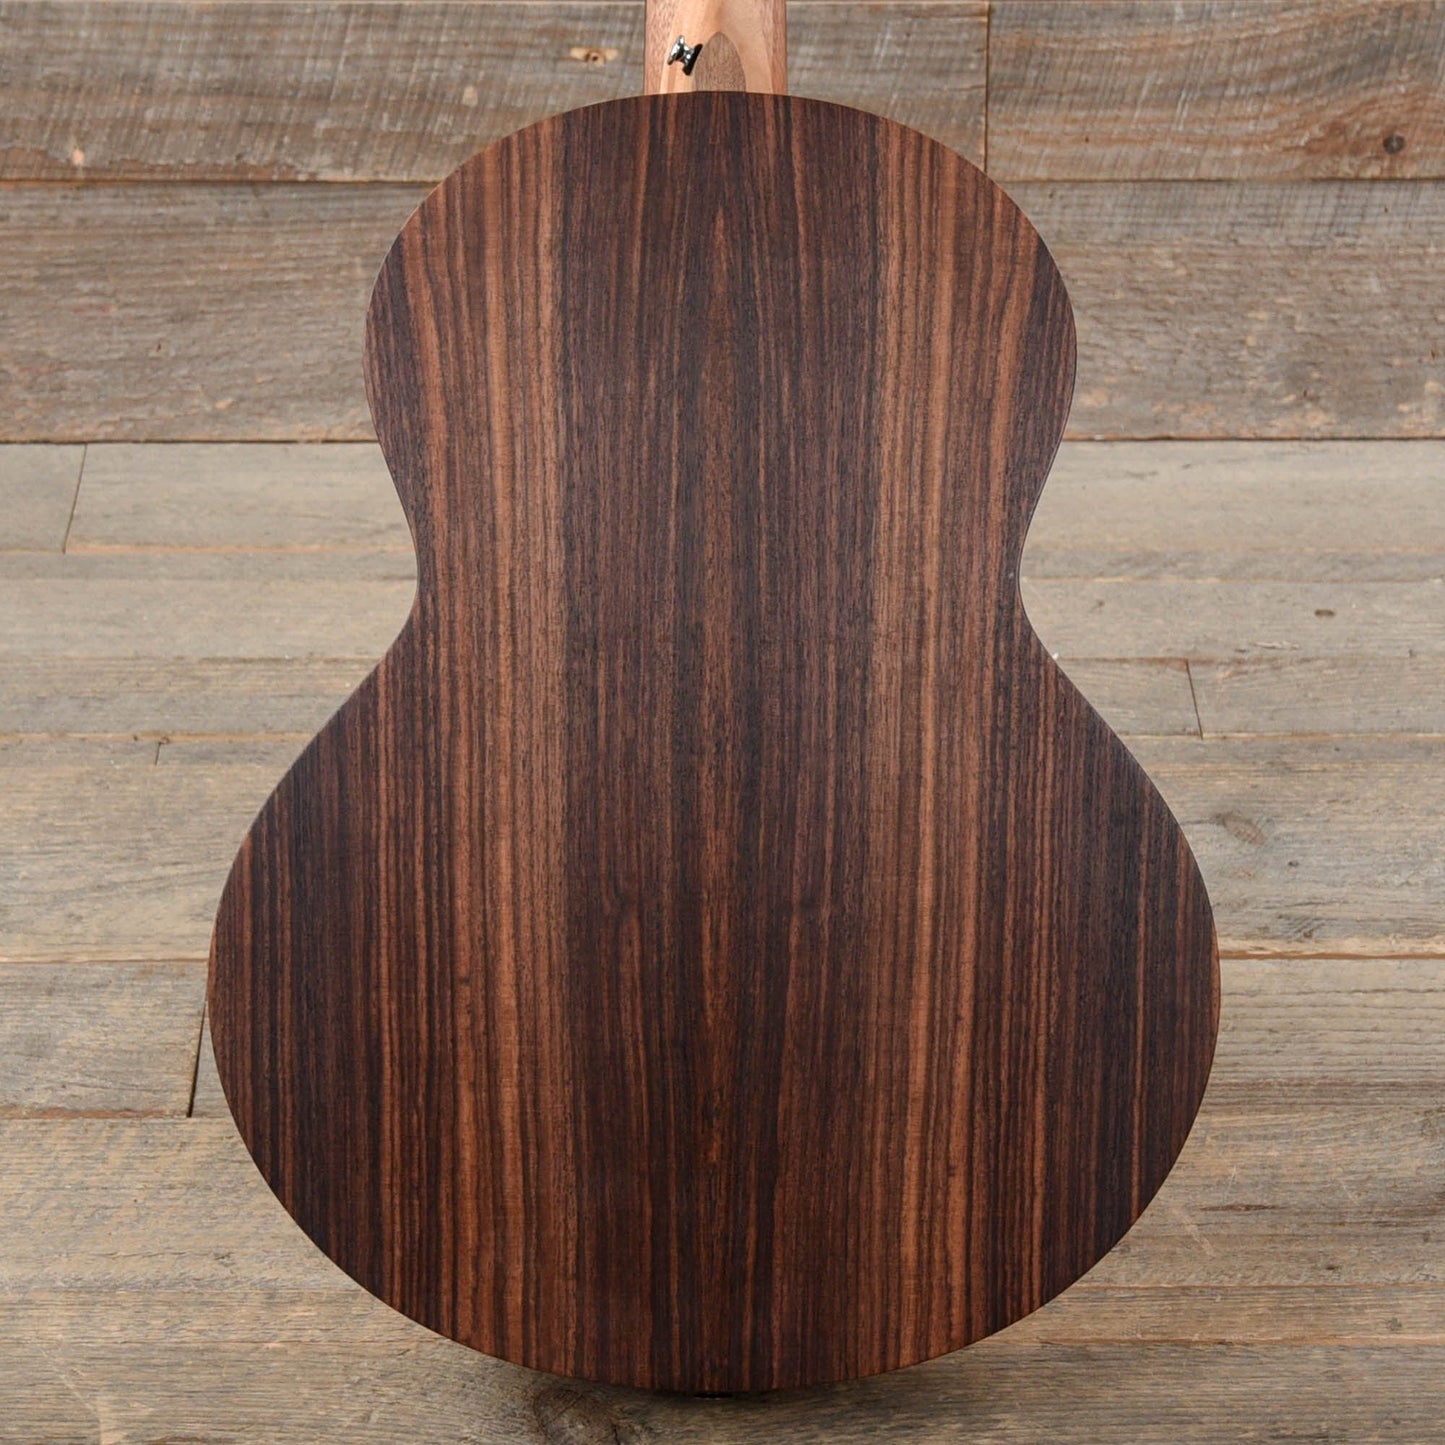 Sheeran by Lowden S02 Sitka Spruce/Indian Rosewood w/Top Bevel & LR Baggs Element VTC Acoustic Guitars / Mini/Travel